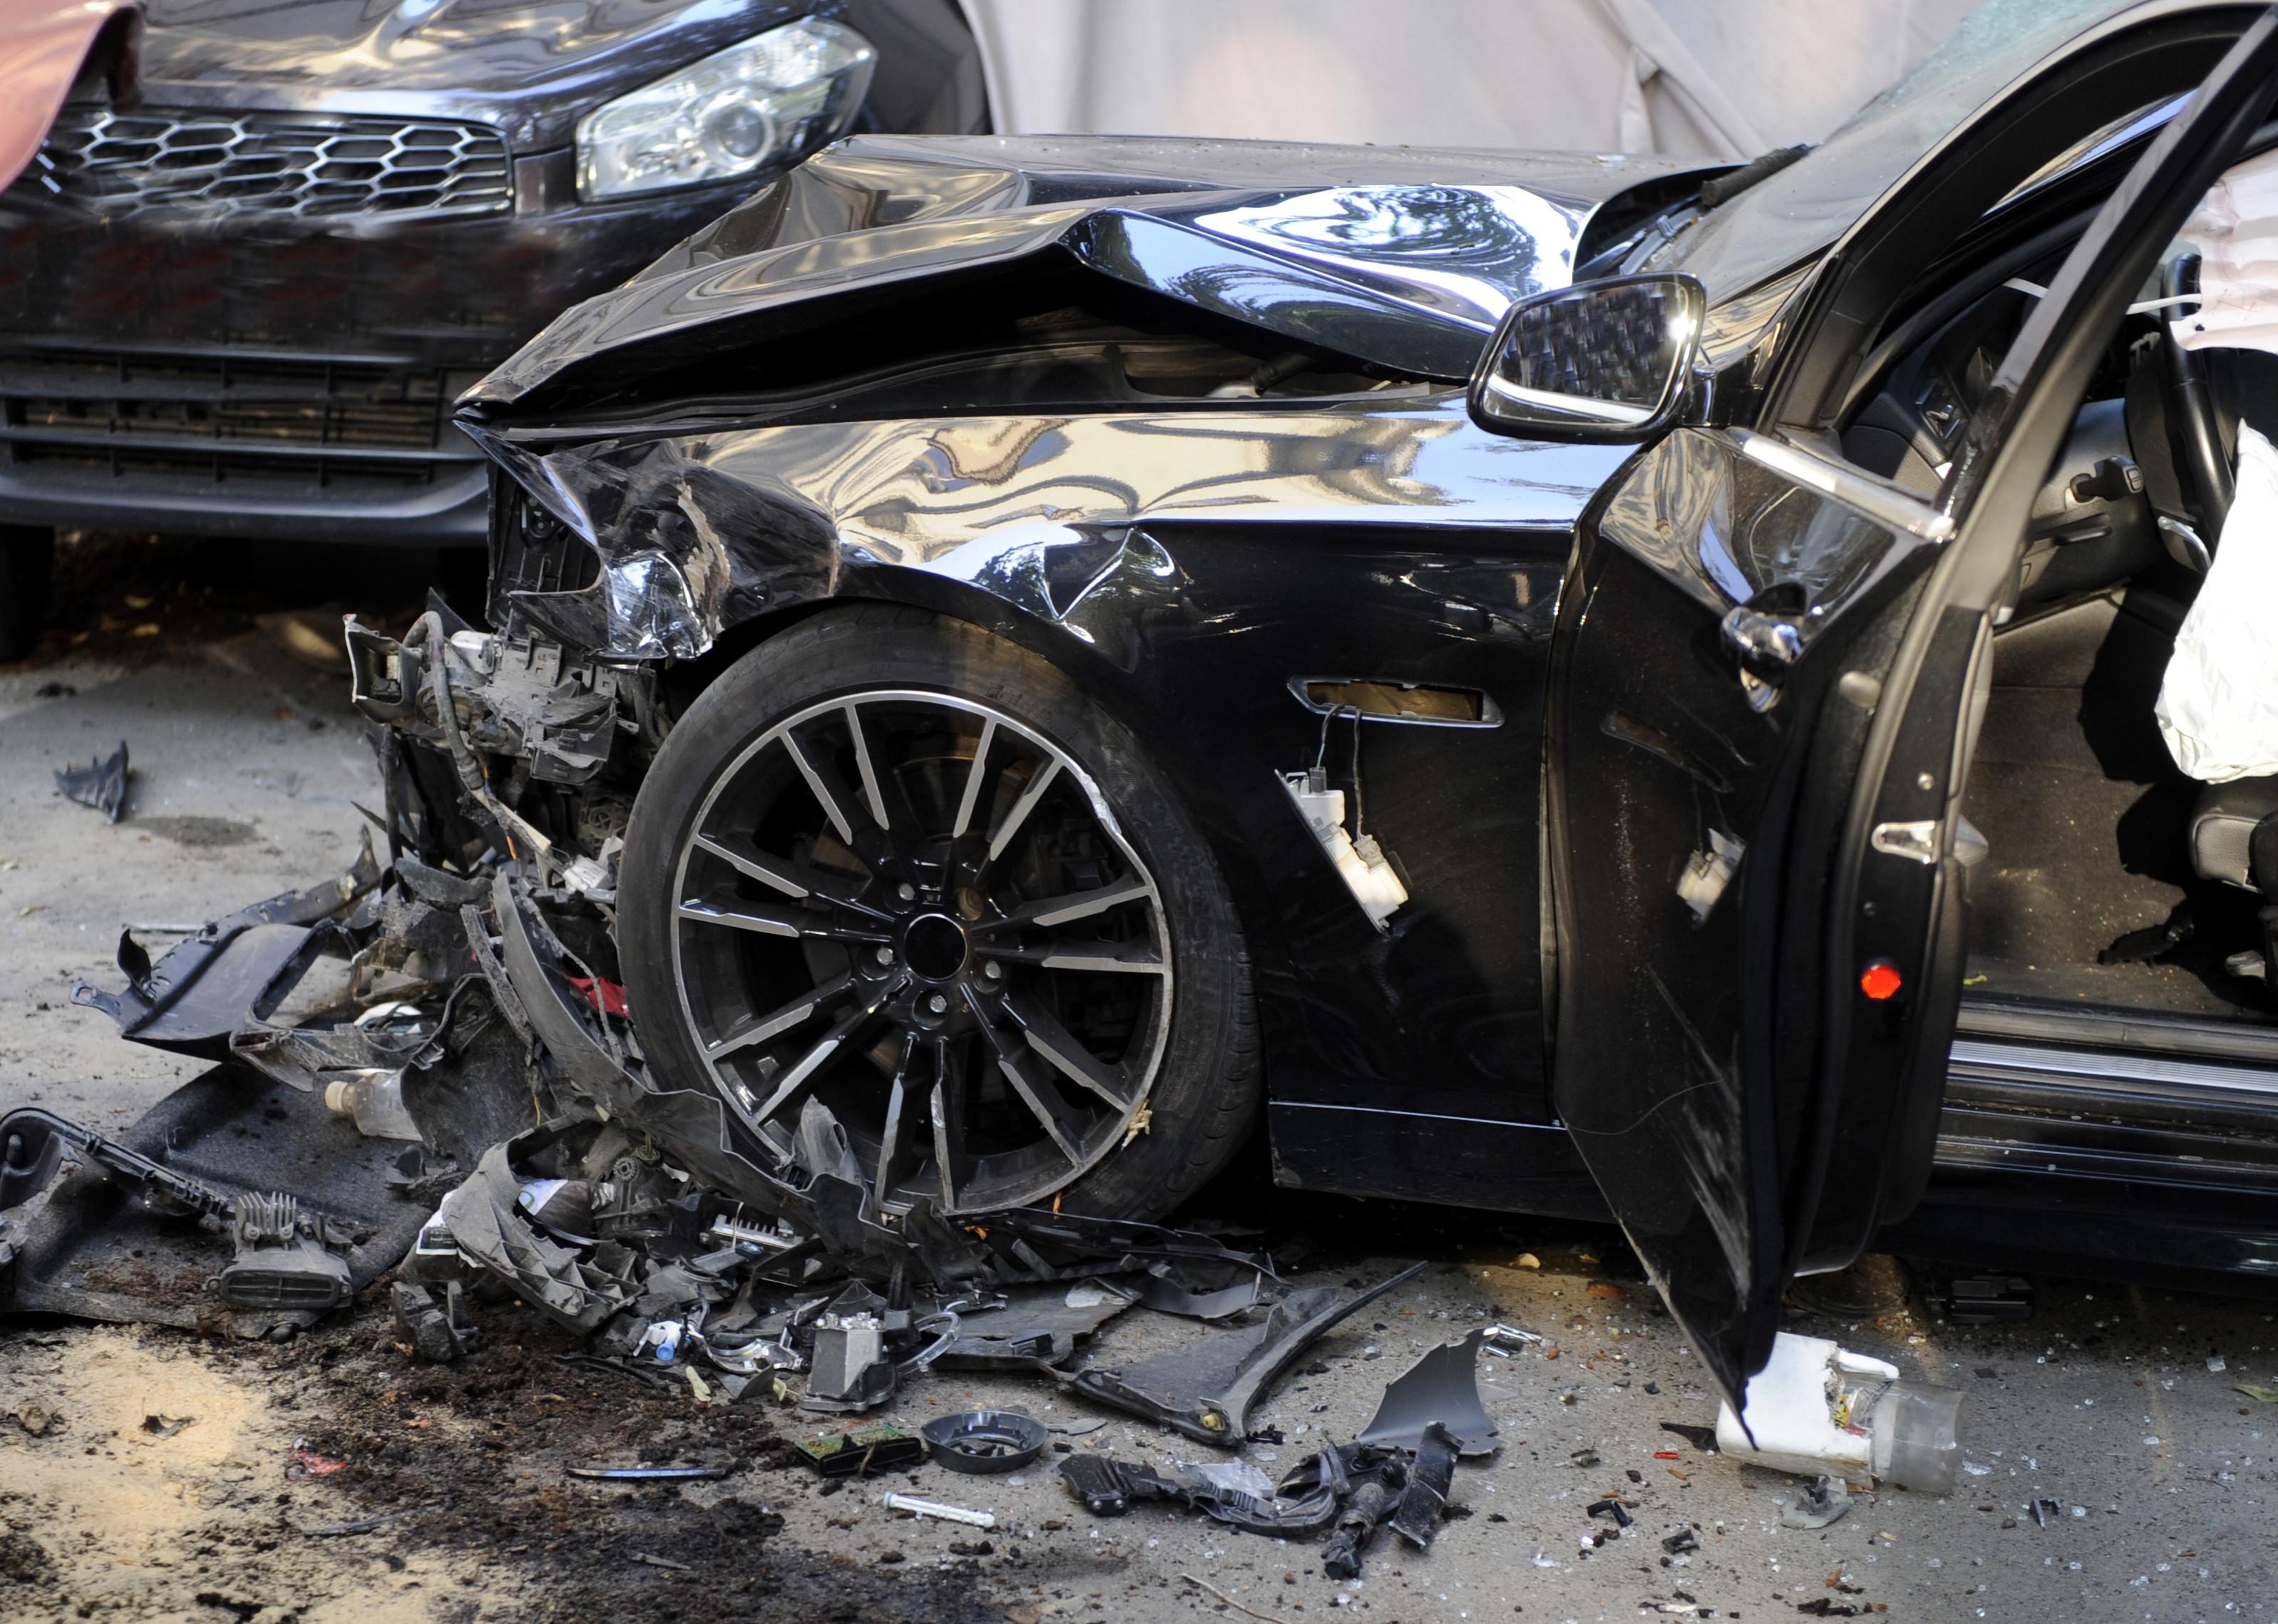 Close-up of destroyed car with deployed air bags.